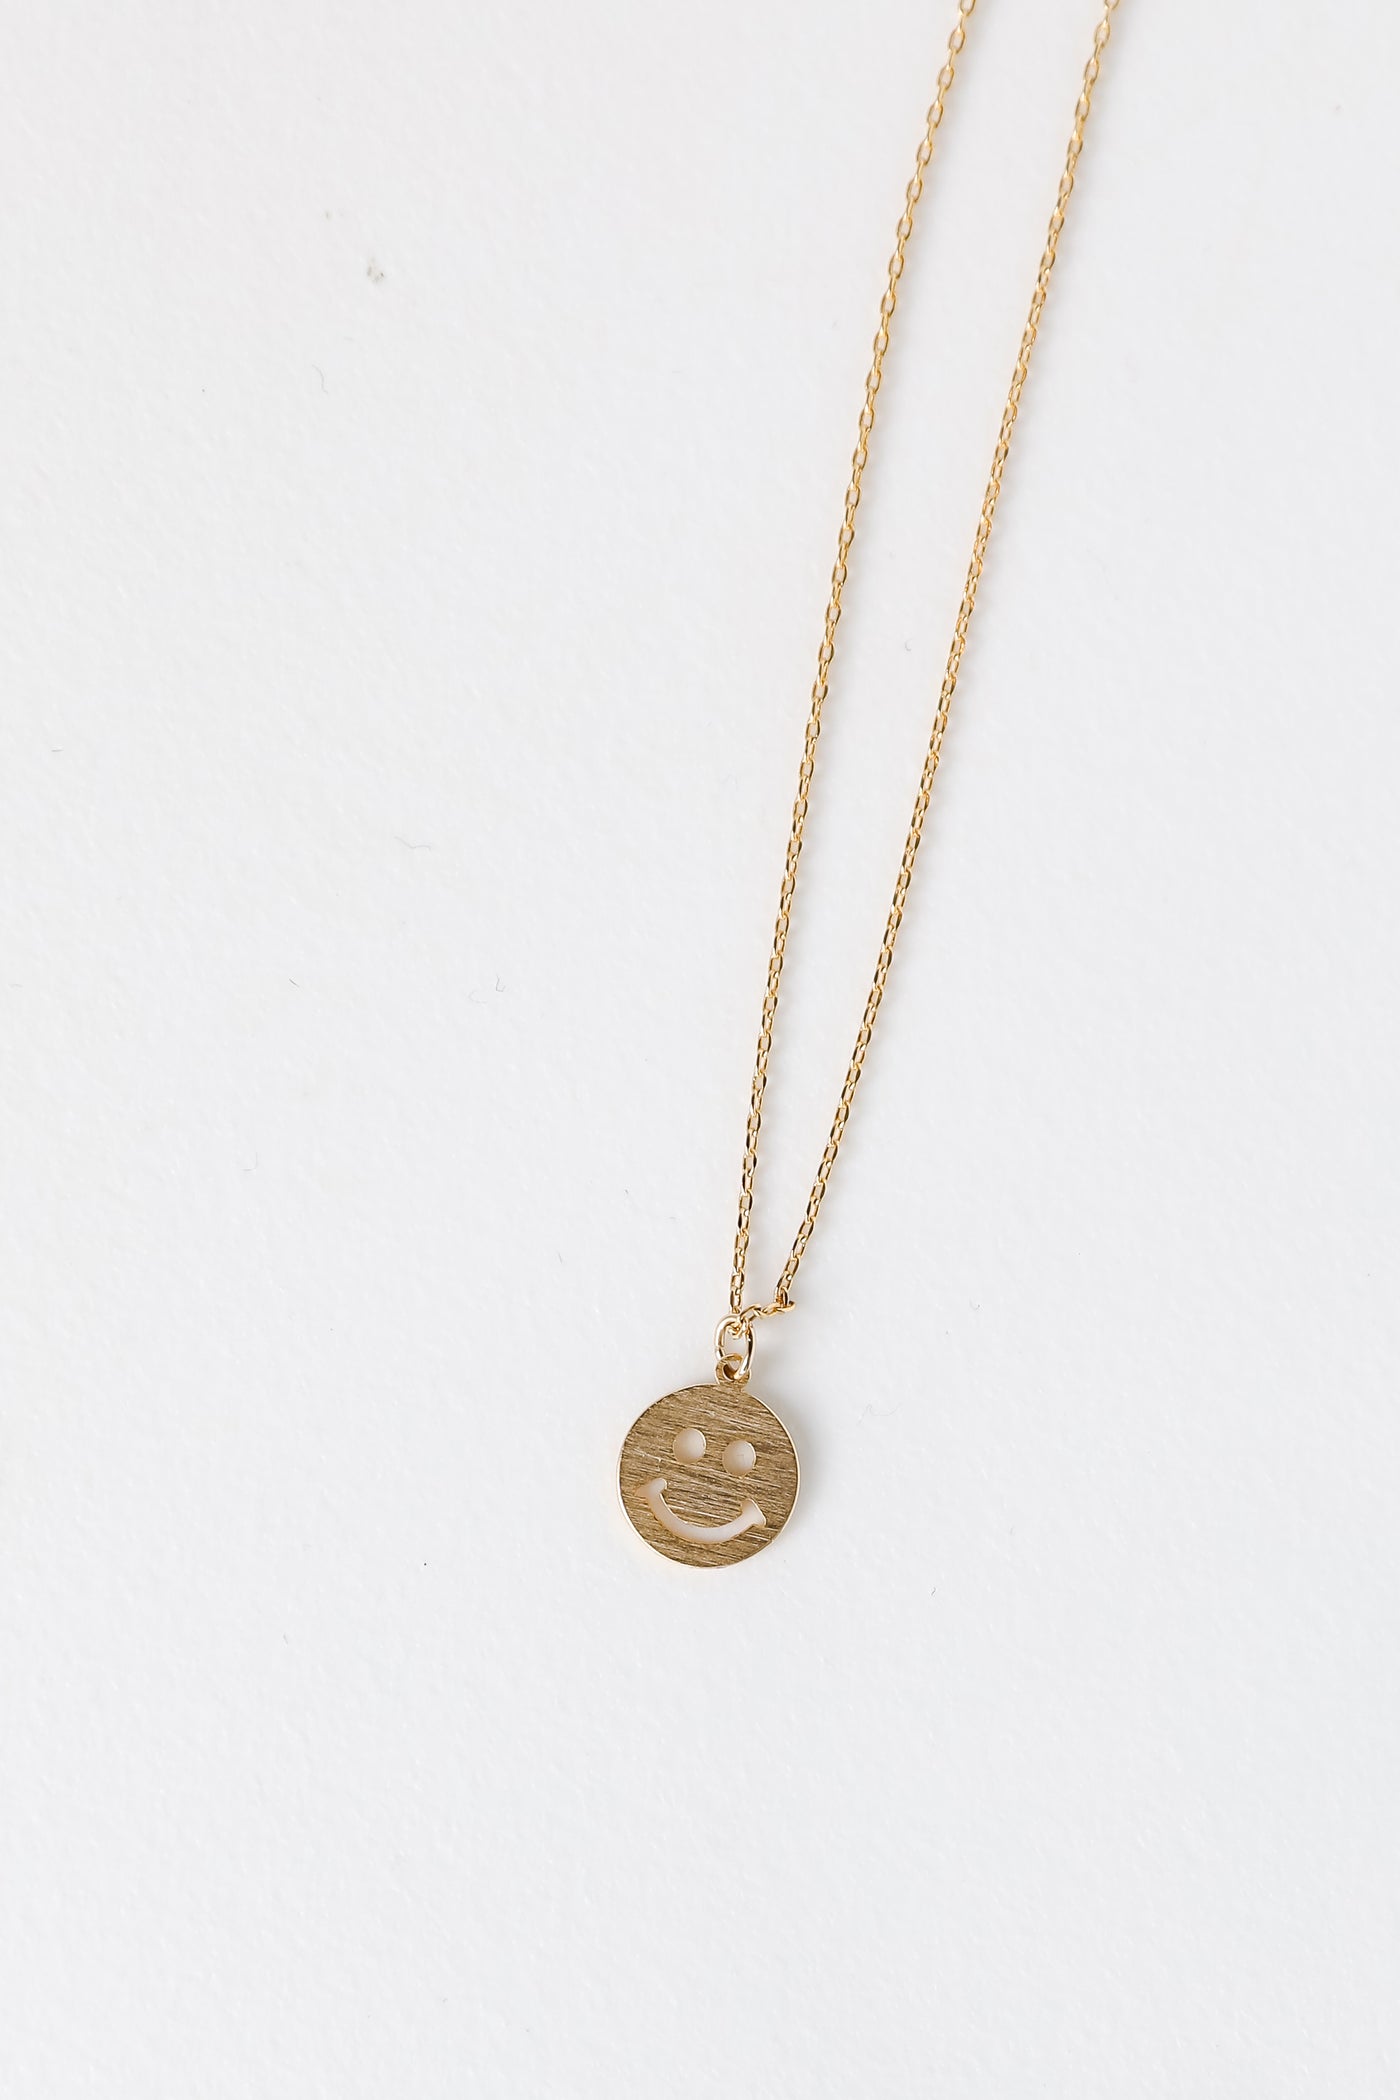 Gold Smiley Face Charm Necklace flat lay